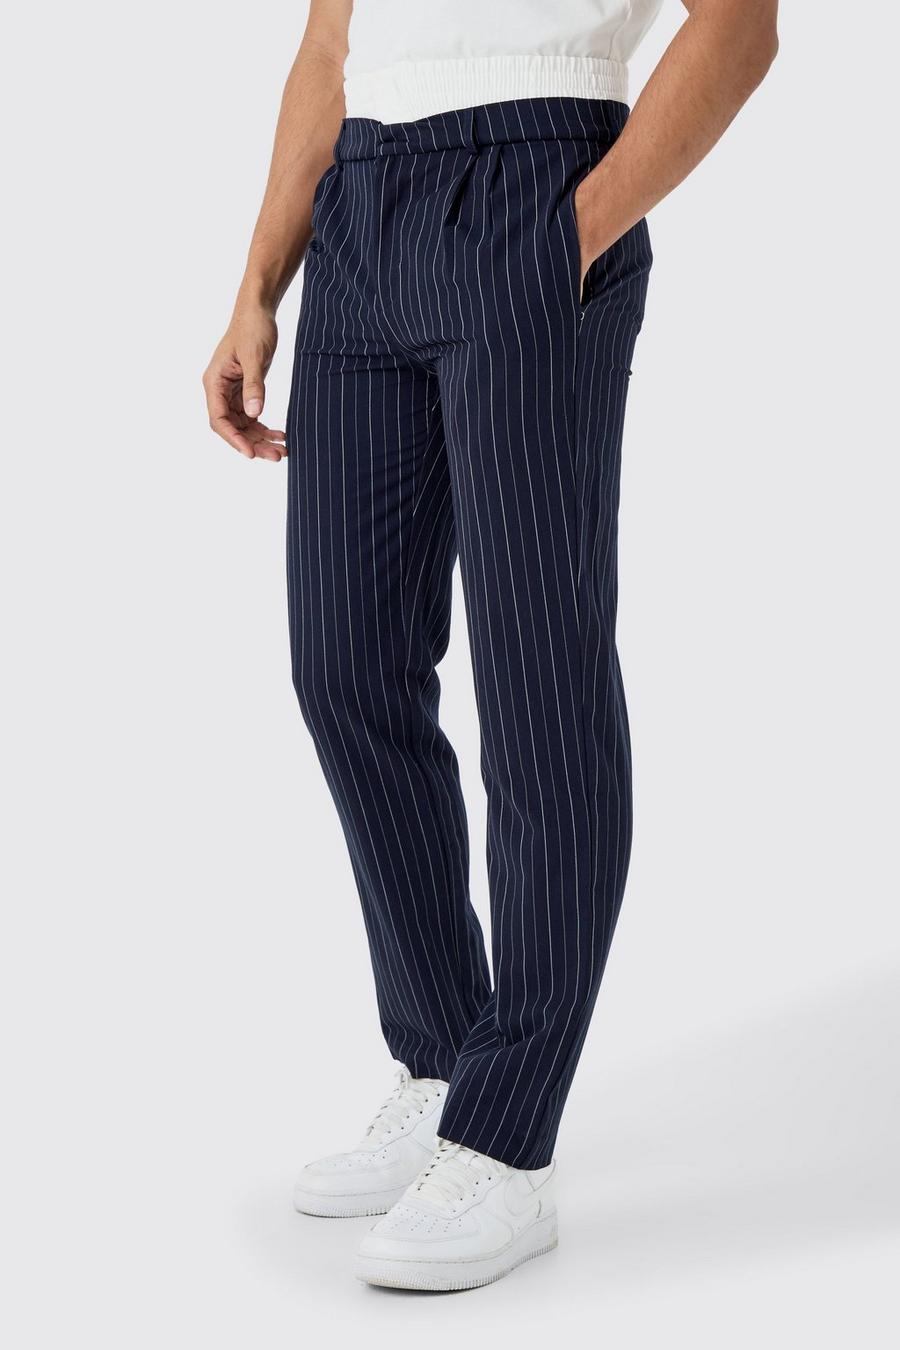 Navy Boxer Waistband Pinstripe Tailored Trousers